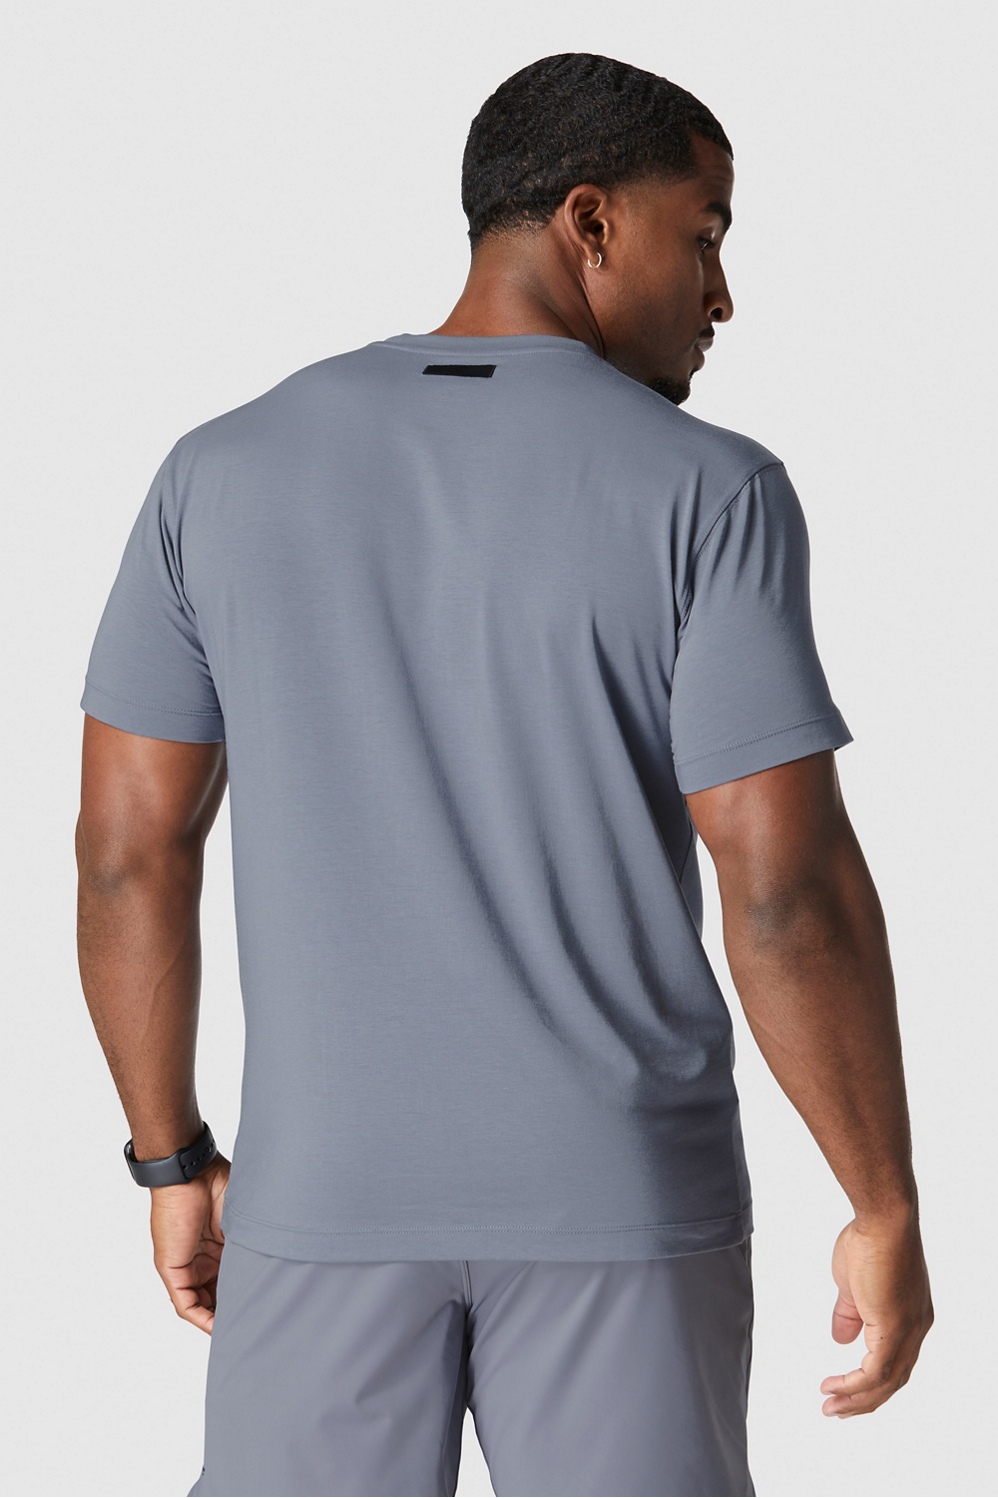 The 24-7 Tee - Fabletics